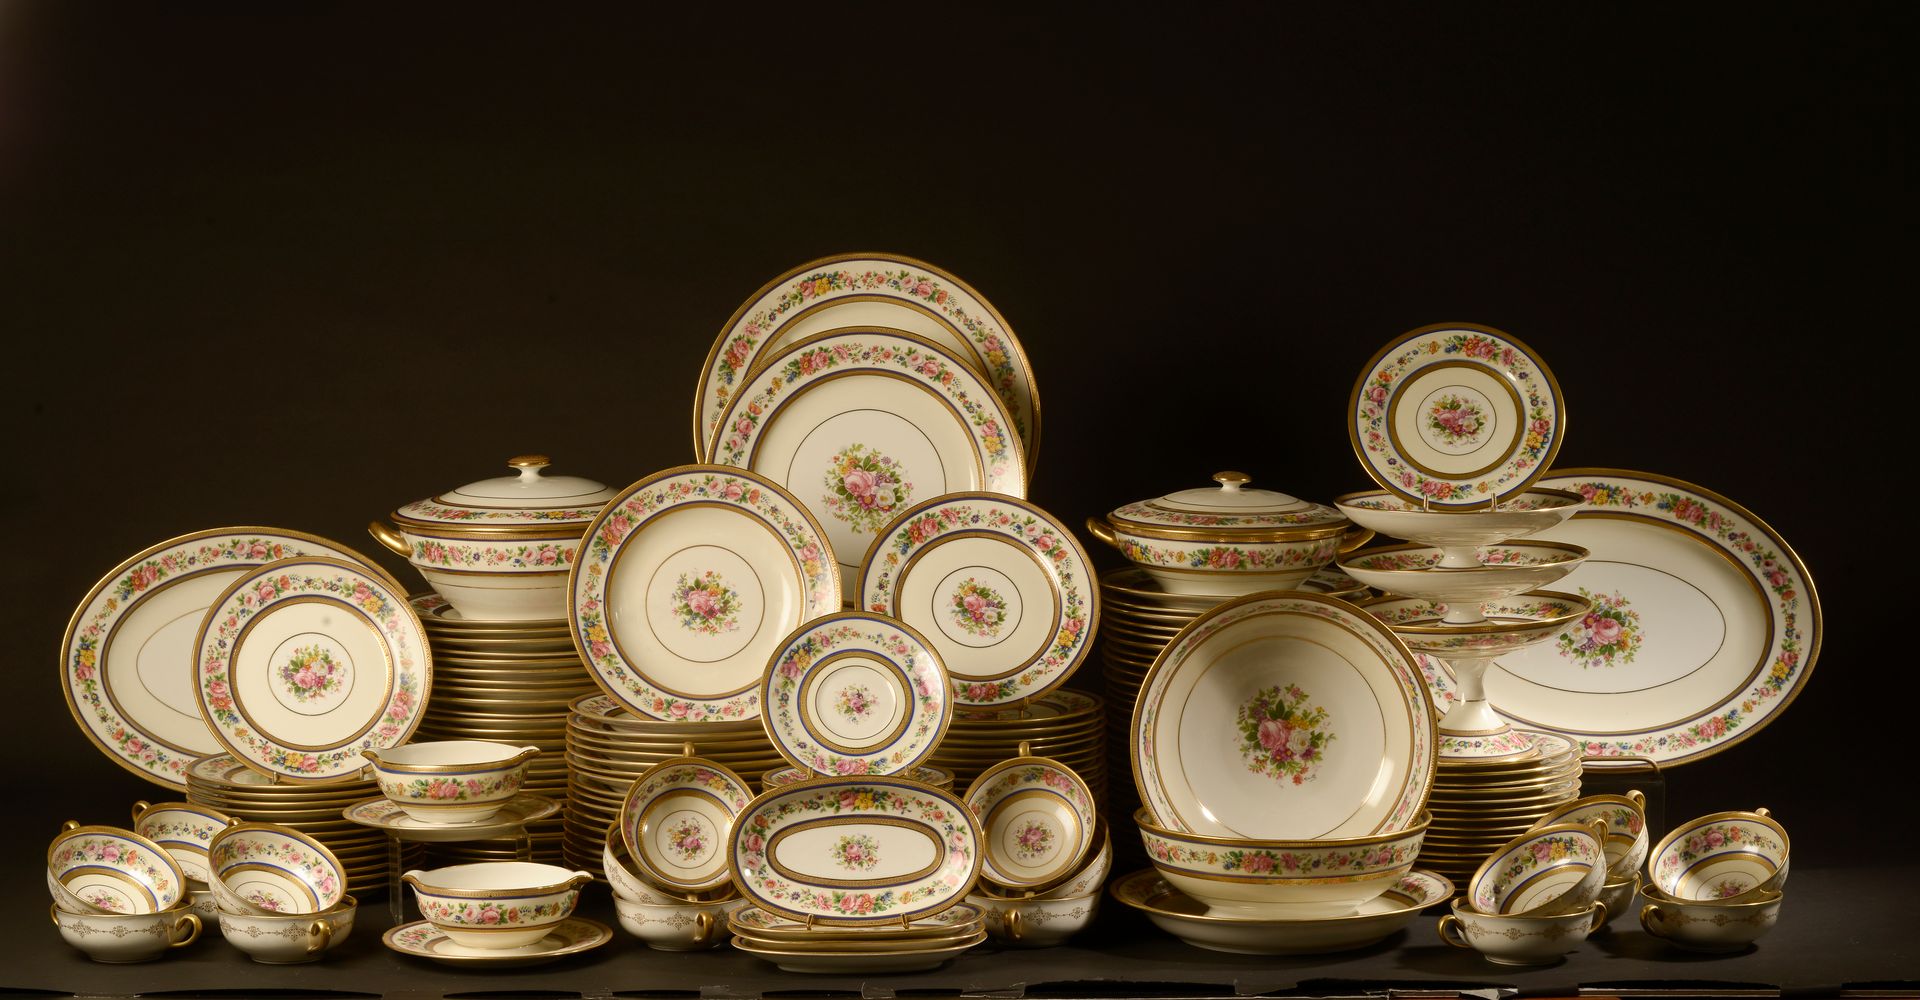 Null LIMOGES, HOUSE ROUART.

Part of a porcelain dinner service with rich polych&hellip;